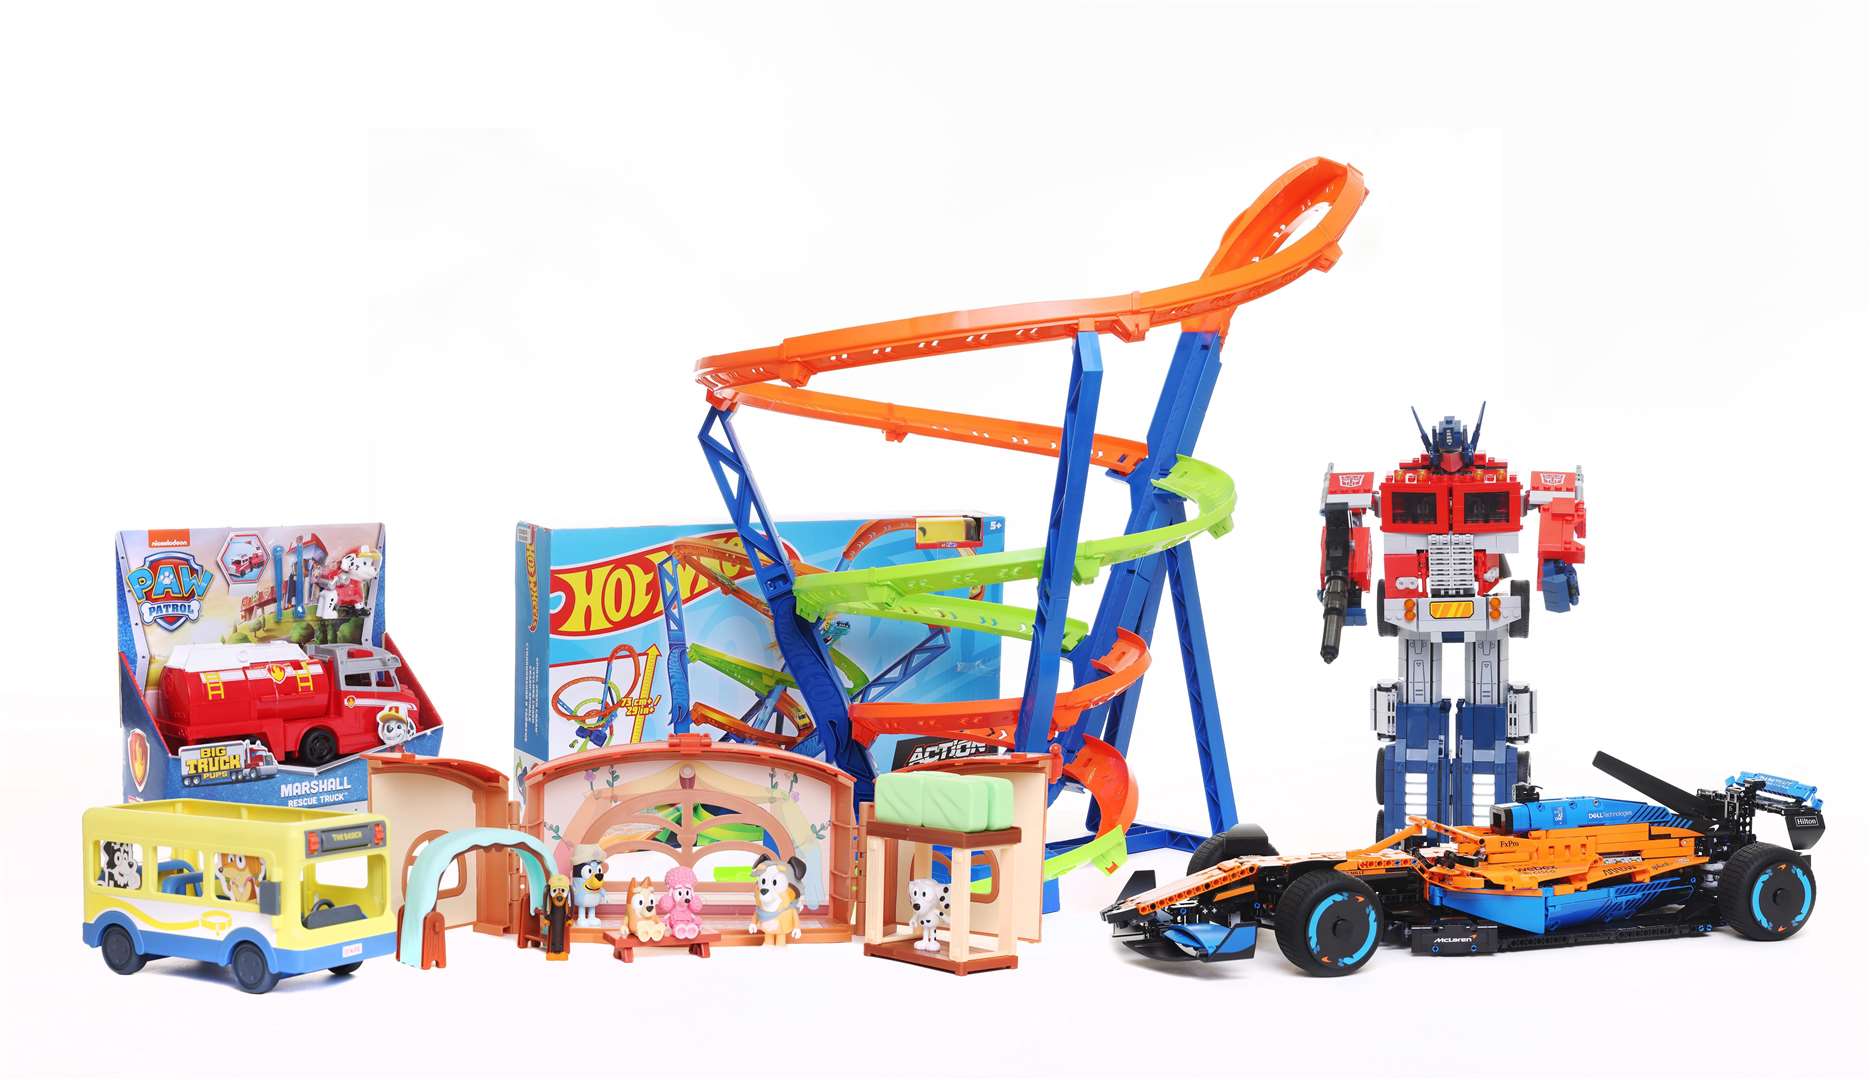 Argos reveal's top toys for Christmas 2022 including Paw Patrol, LEGO,  Harry Potter, SquishMallow and more - Manchester Evening News